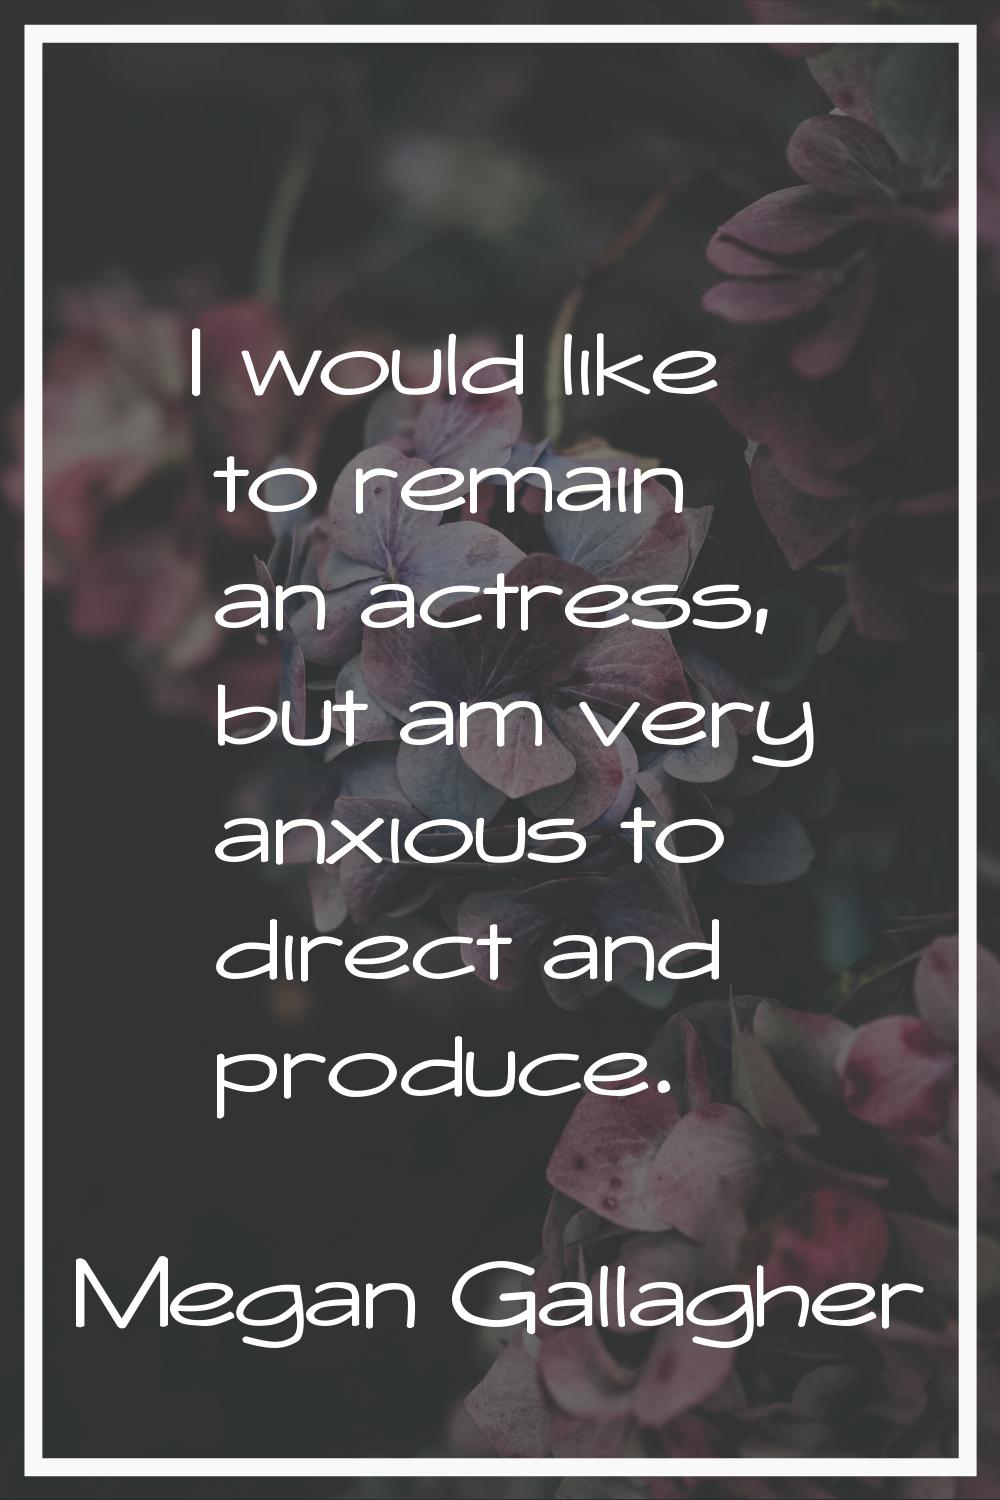 I would like to remain an actress, but am very anxious to direct and produce.